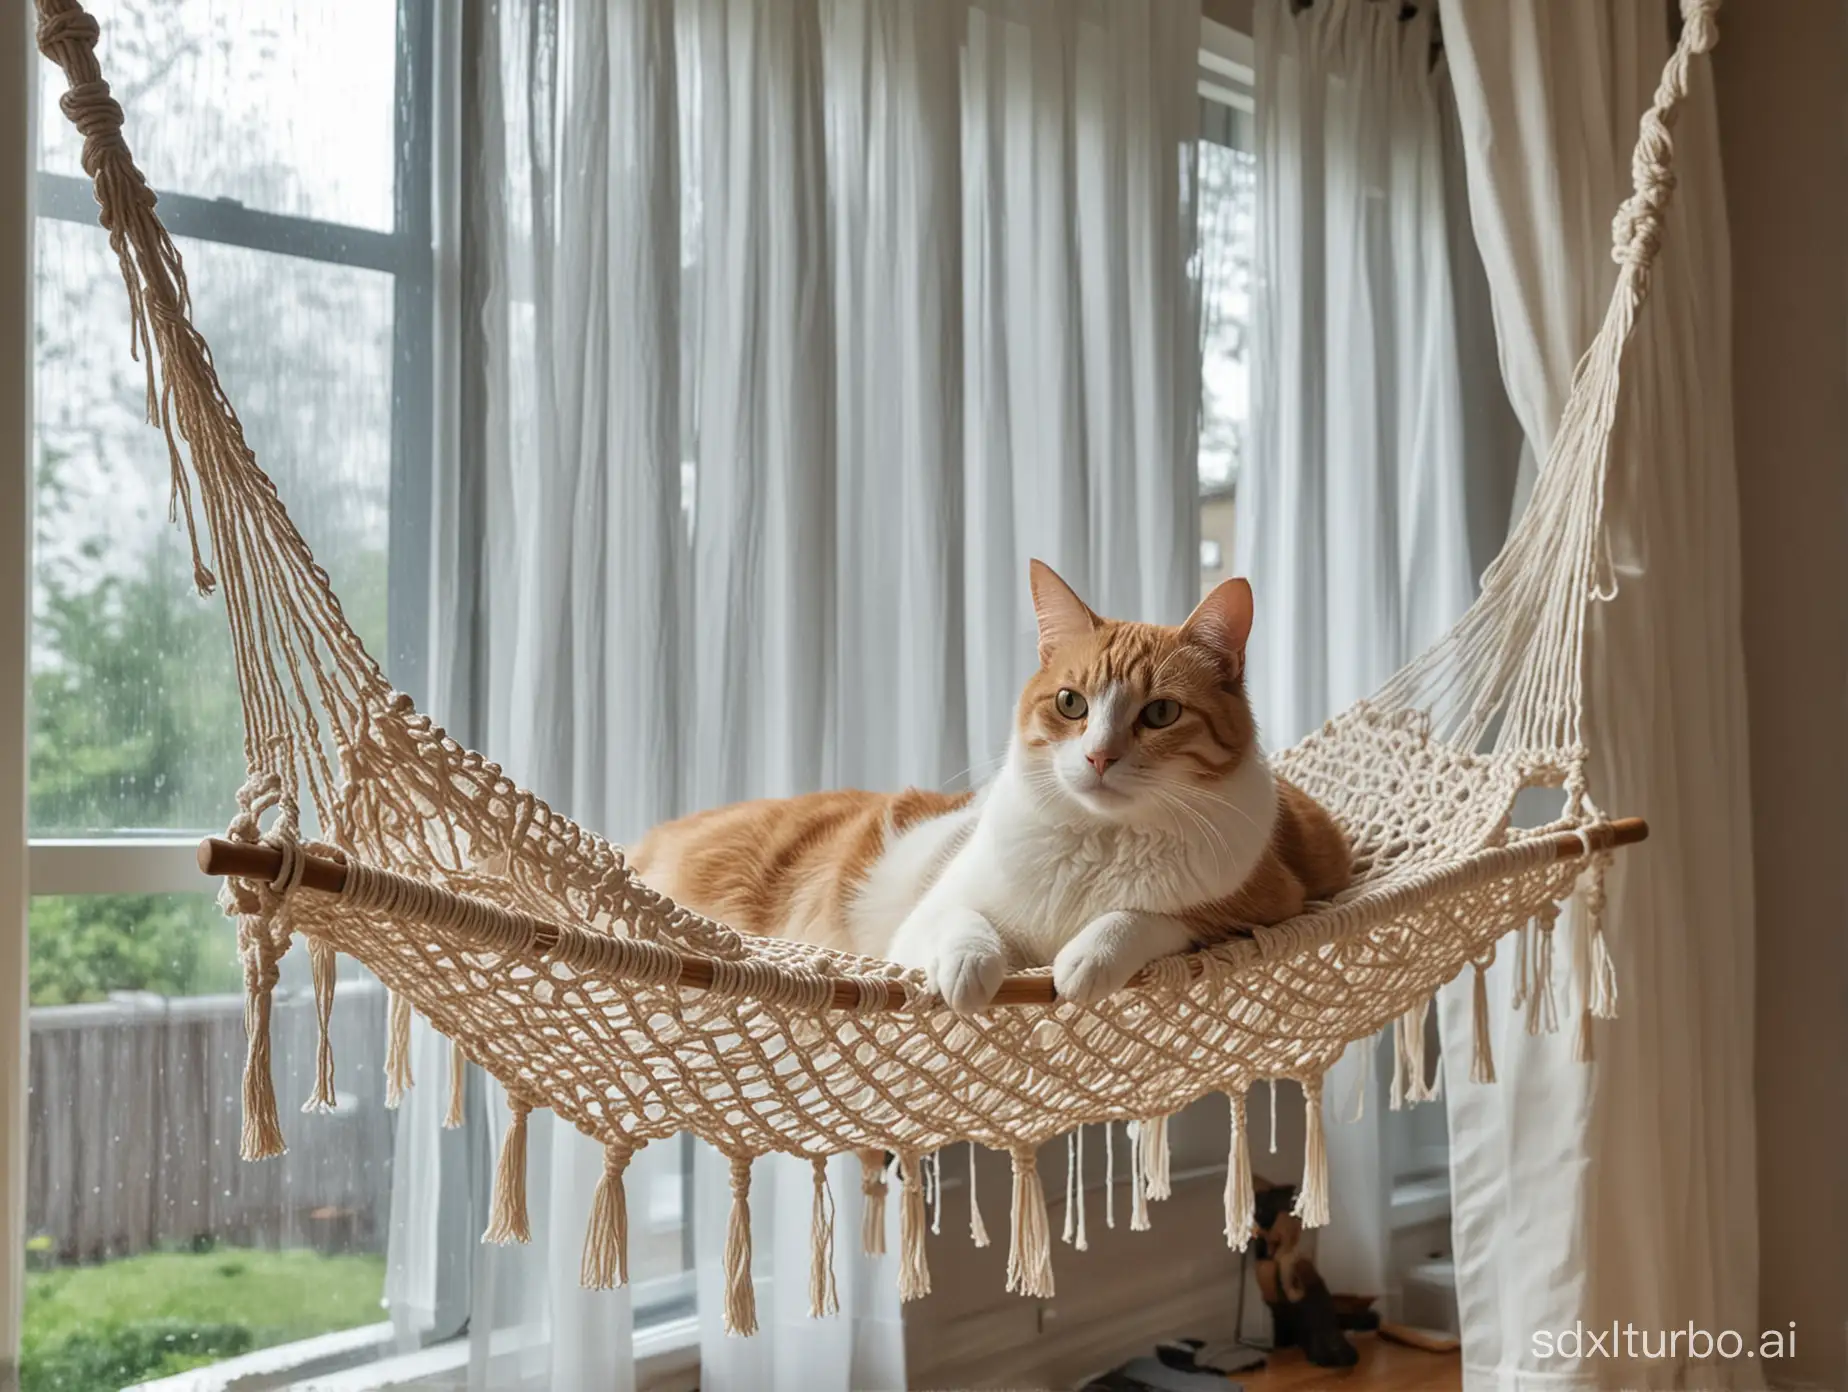 Macrame-Cat-Hammock-with-Blowing-Curtains-in-Rainy-Setting